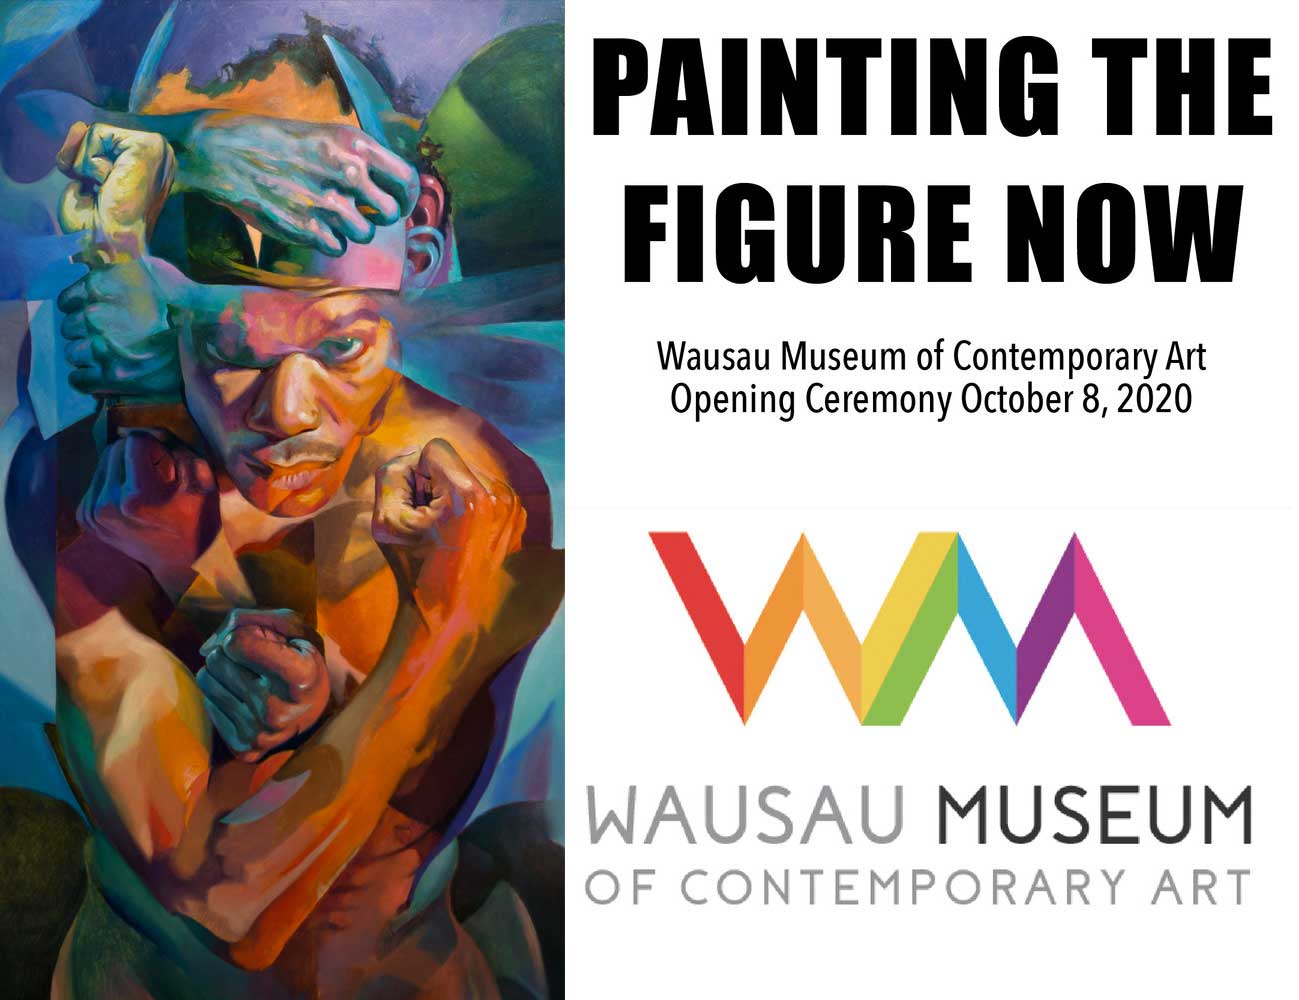 Postcard invite for "Painting The Figure Now" 2020 at Wausau Museum of Contemporary Art. 